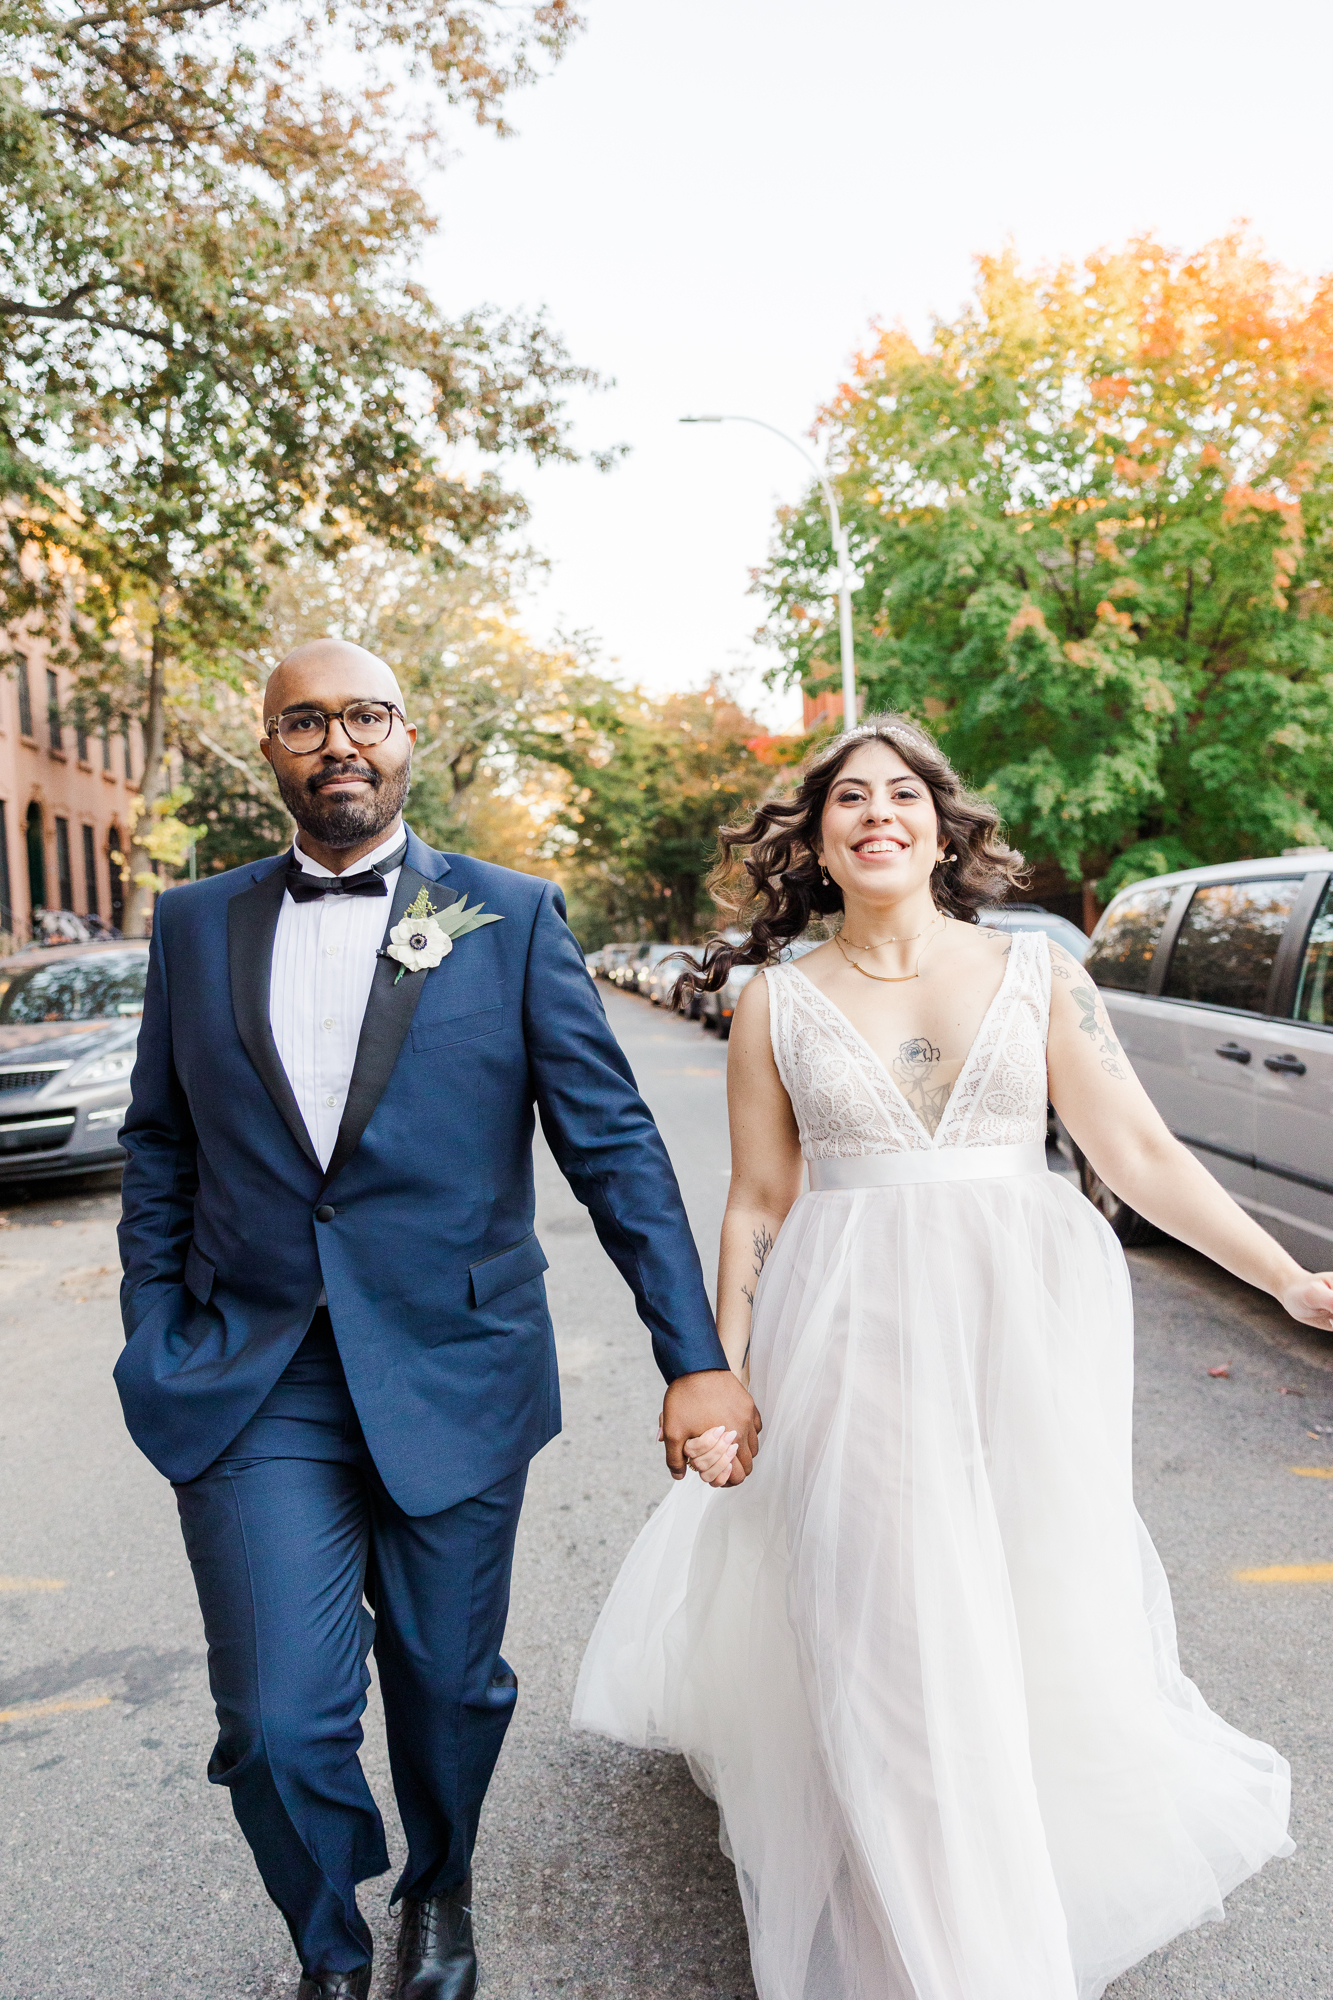 Perfect Deity Wedding Photography at Unique Event Space in Downtown Brooklyn in Autumn